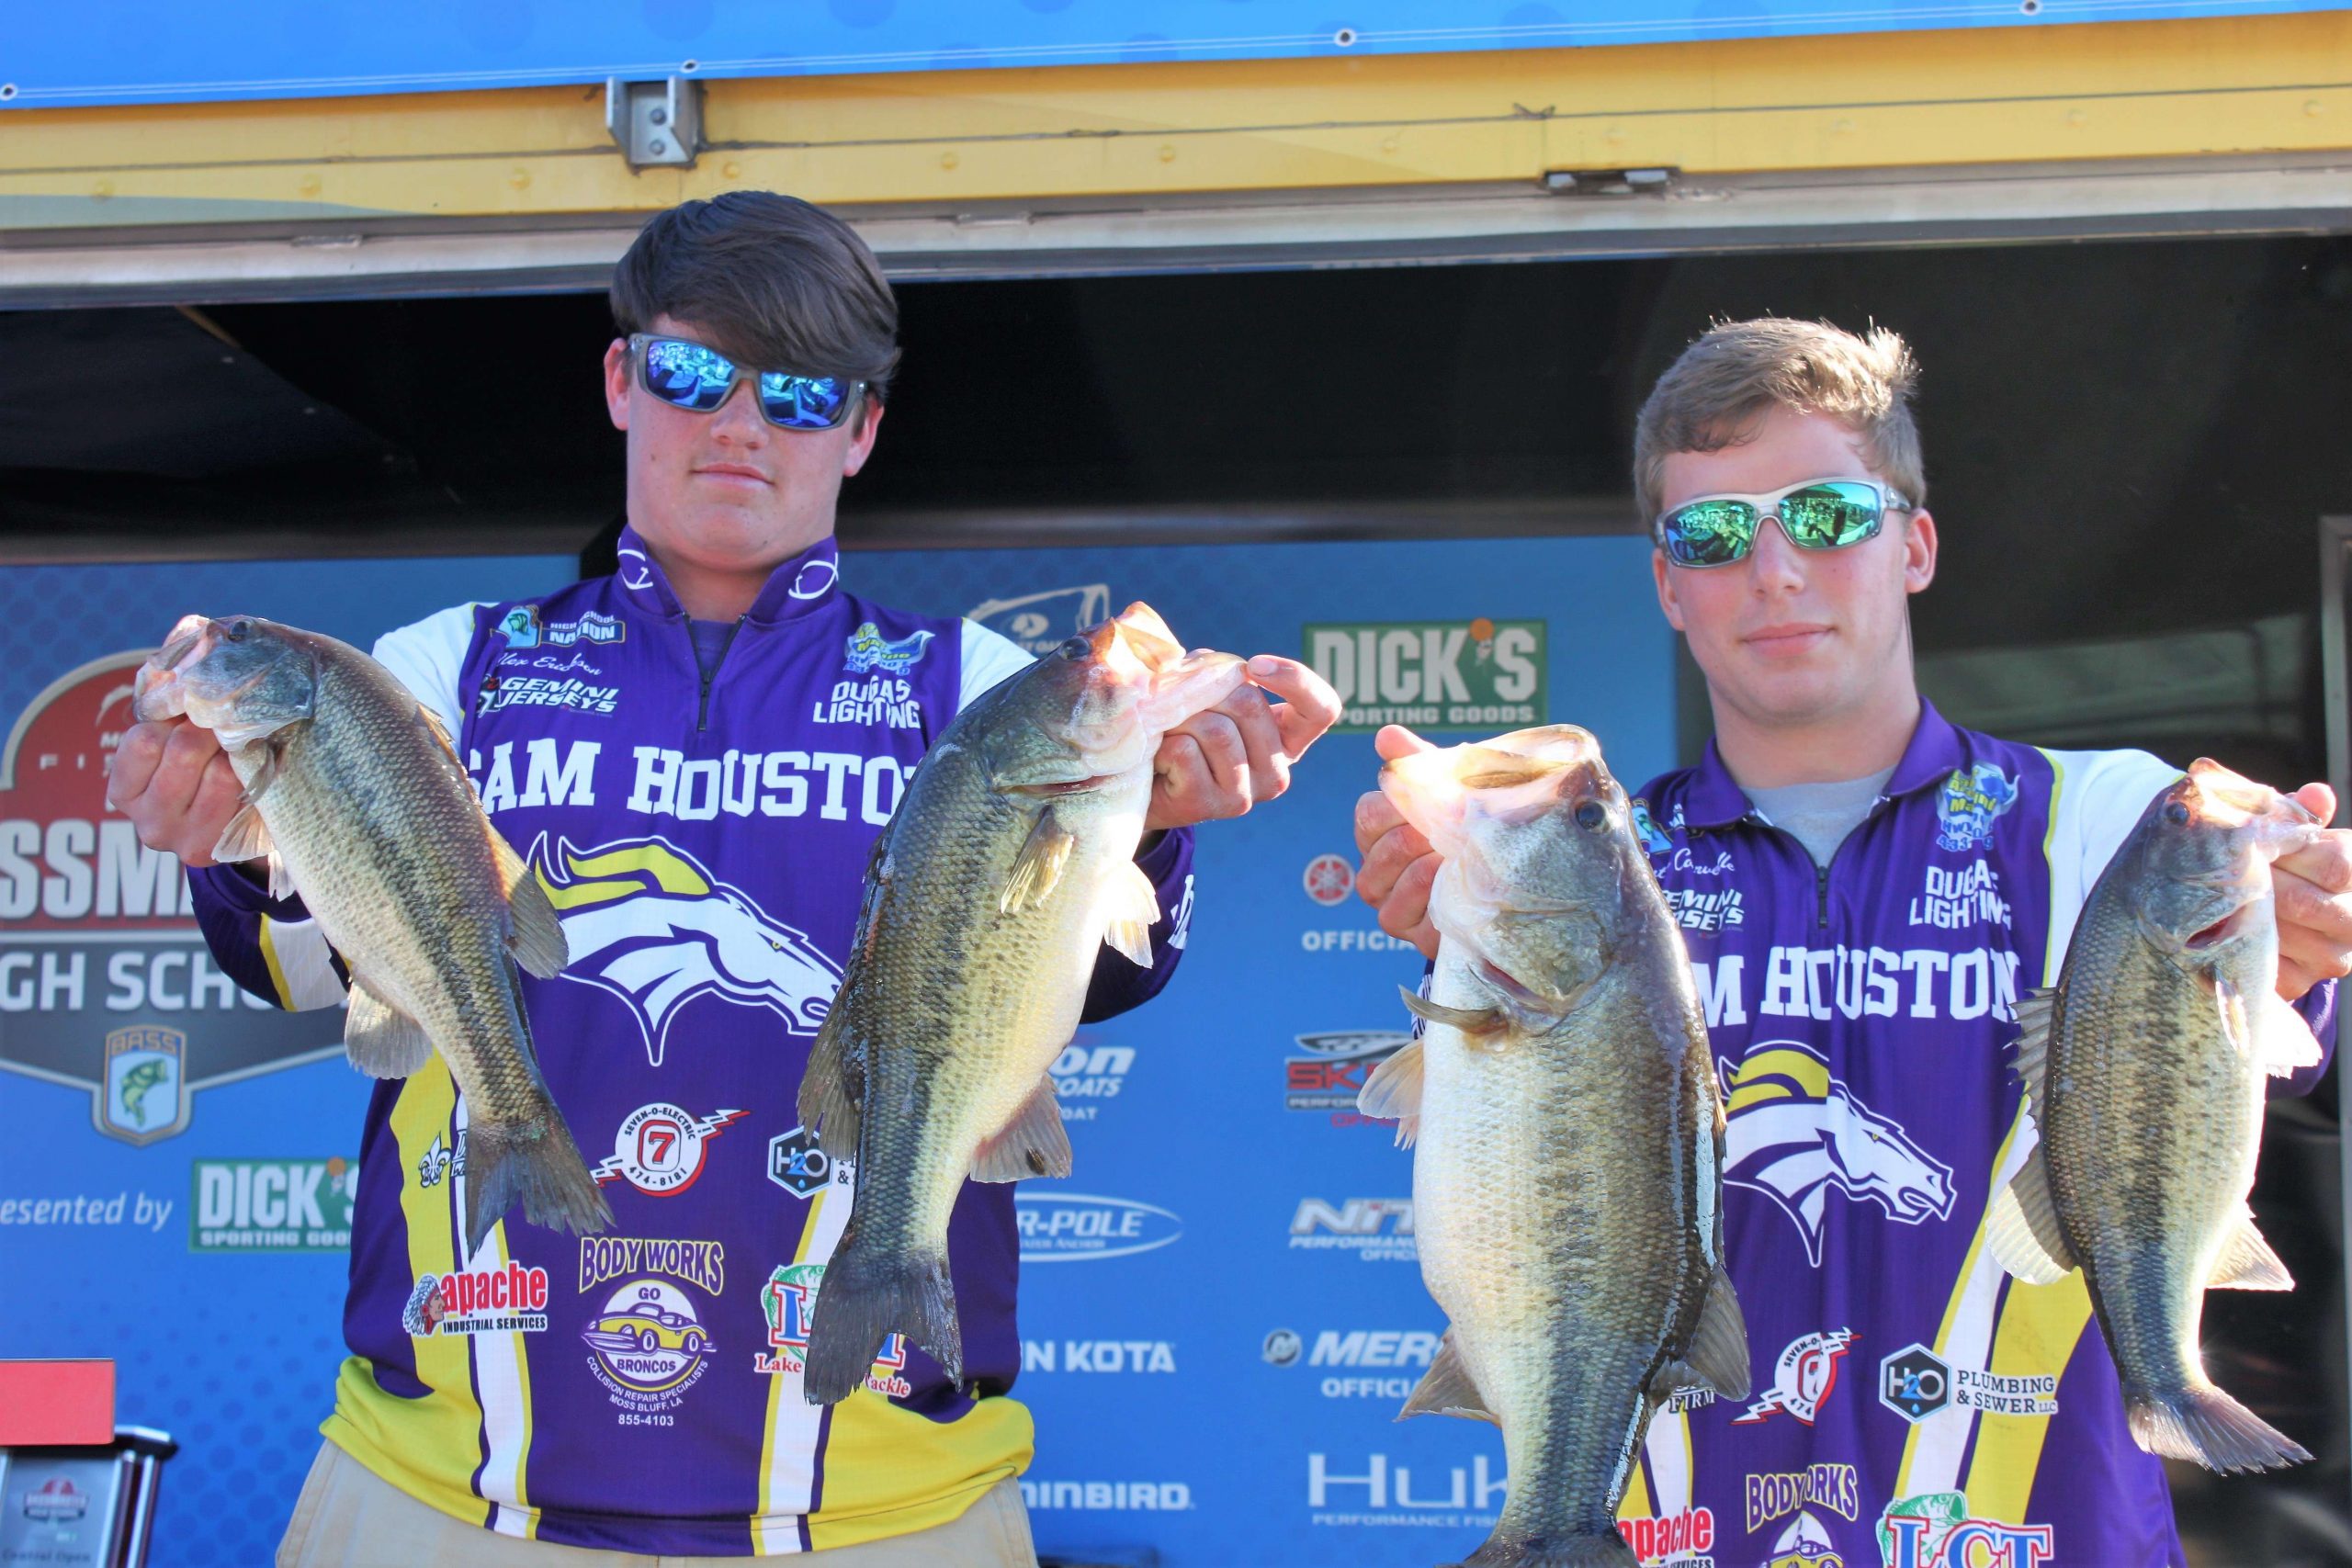 Alex Erickson and Hunter Courvelle won a high school event at Toledo Bend in 2017. They did well again in 2018 with a 13-8 bag that was good enough for 13th place.